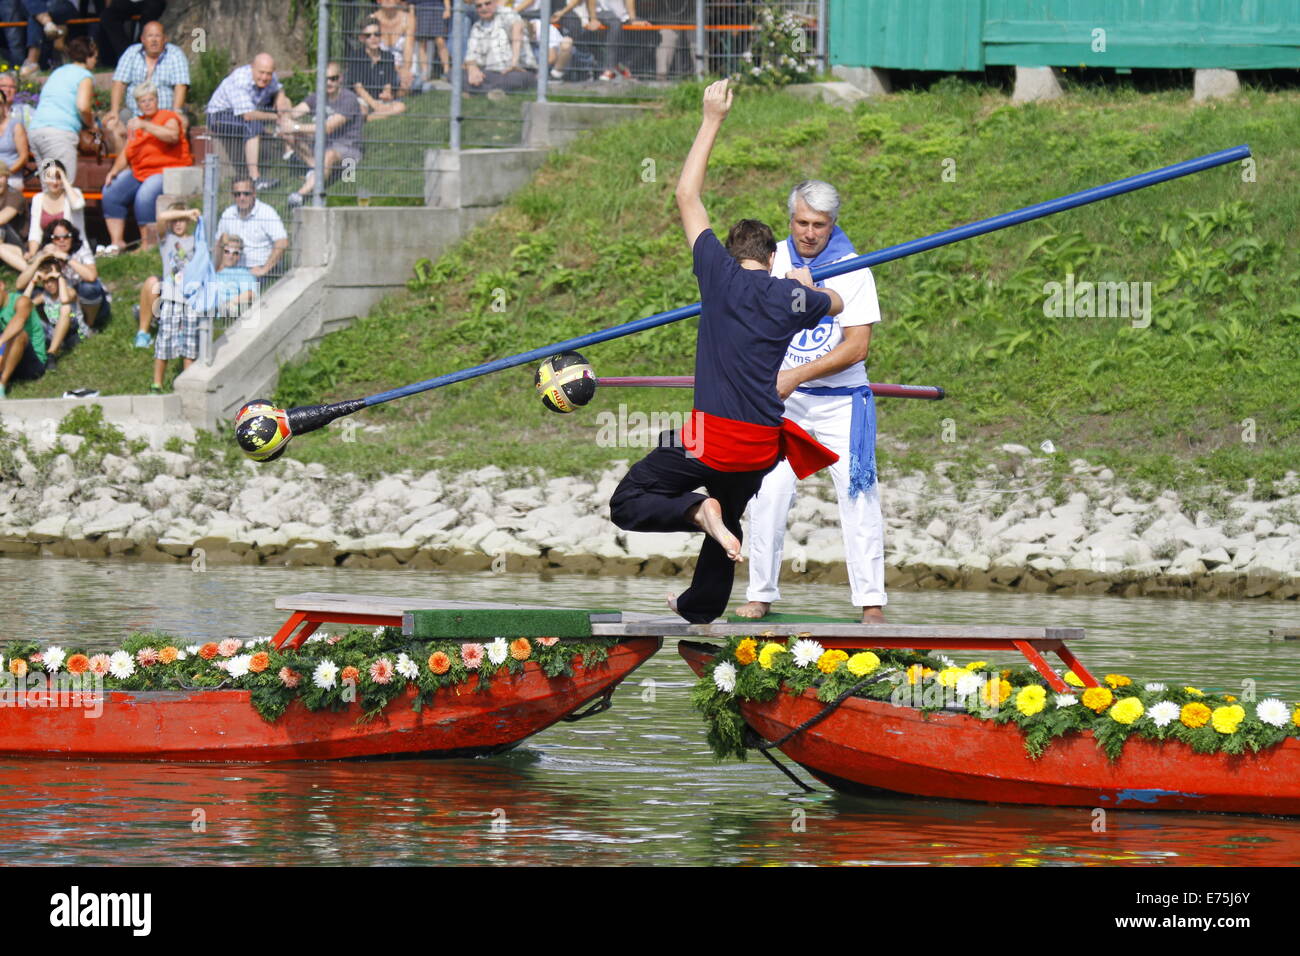 A competitor falls into the river after being pushed by his opponent. Fifteen teams each consisting of 2 rowers and one man fighting with a lance, competed in the 65th anniversary Fischerstechen (Fishermen's Joust) held on the final day of the Backfischfest. © Michael Debets/Pacific Press/Alamy Live News Stock Photo